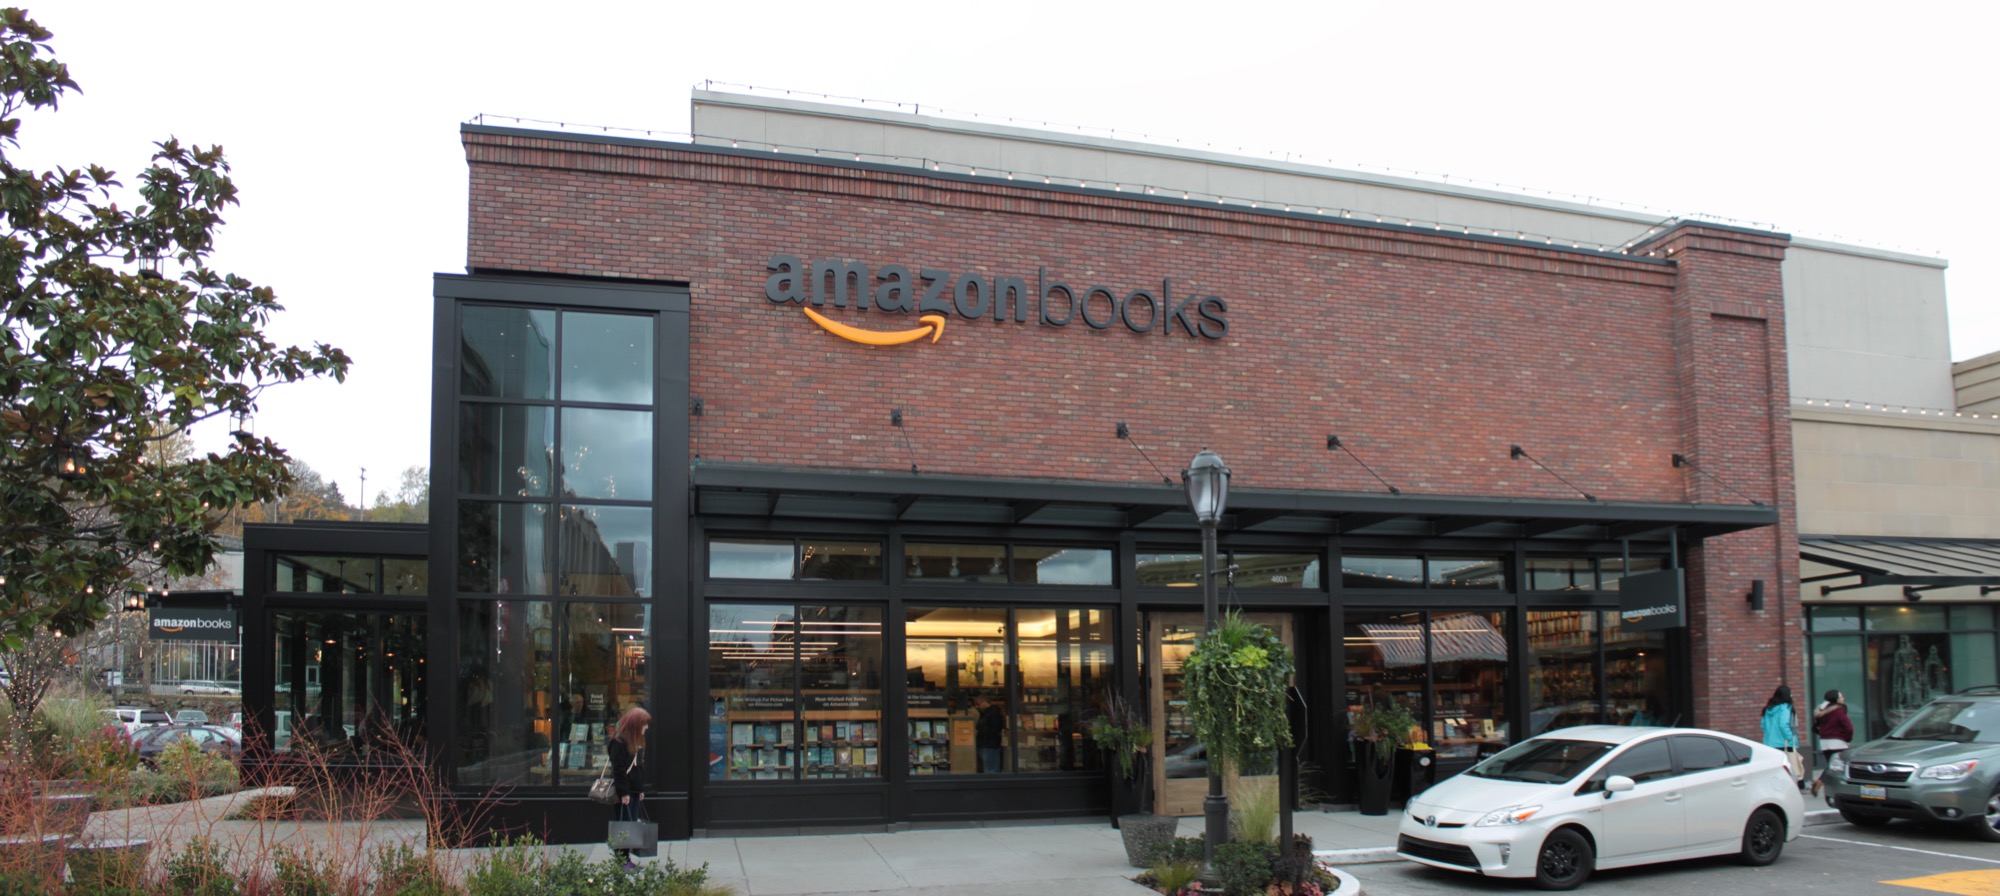 Amazon Book Store at Seattle